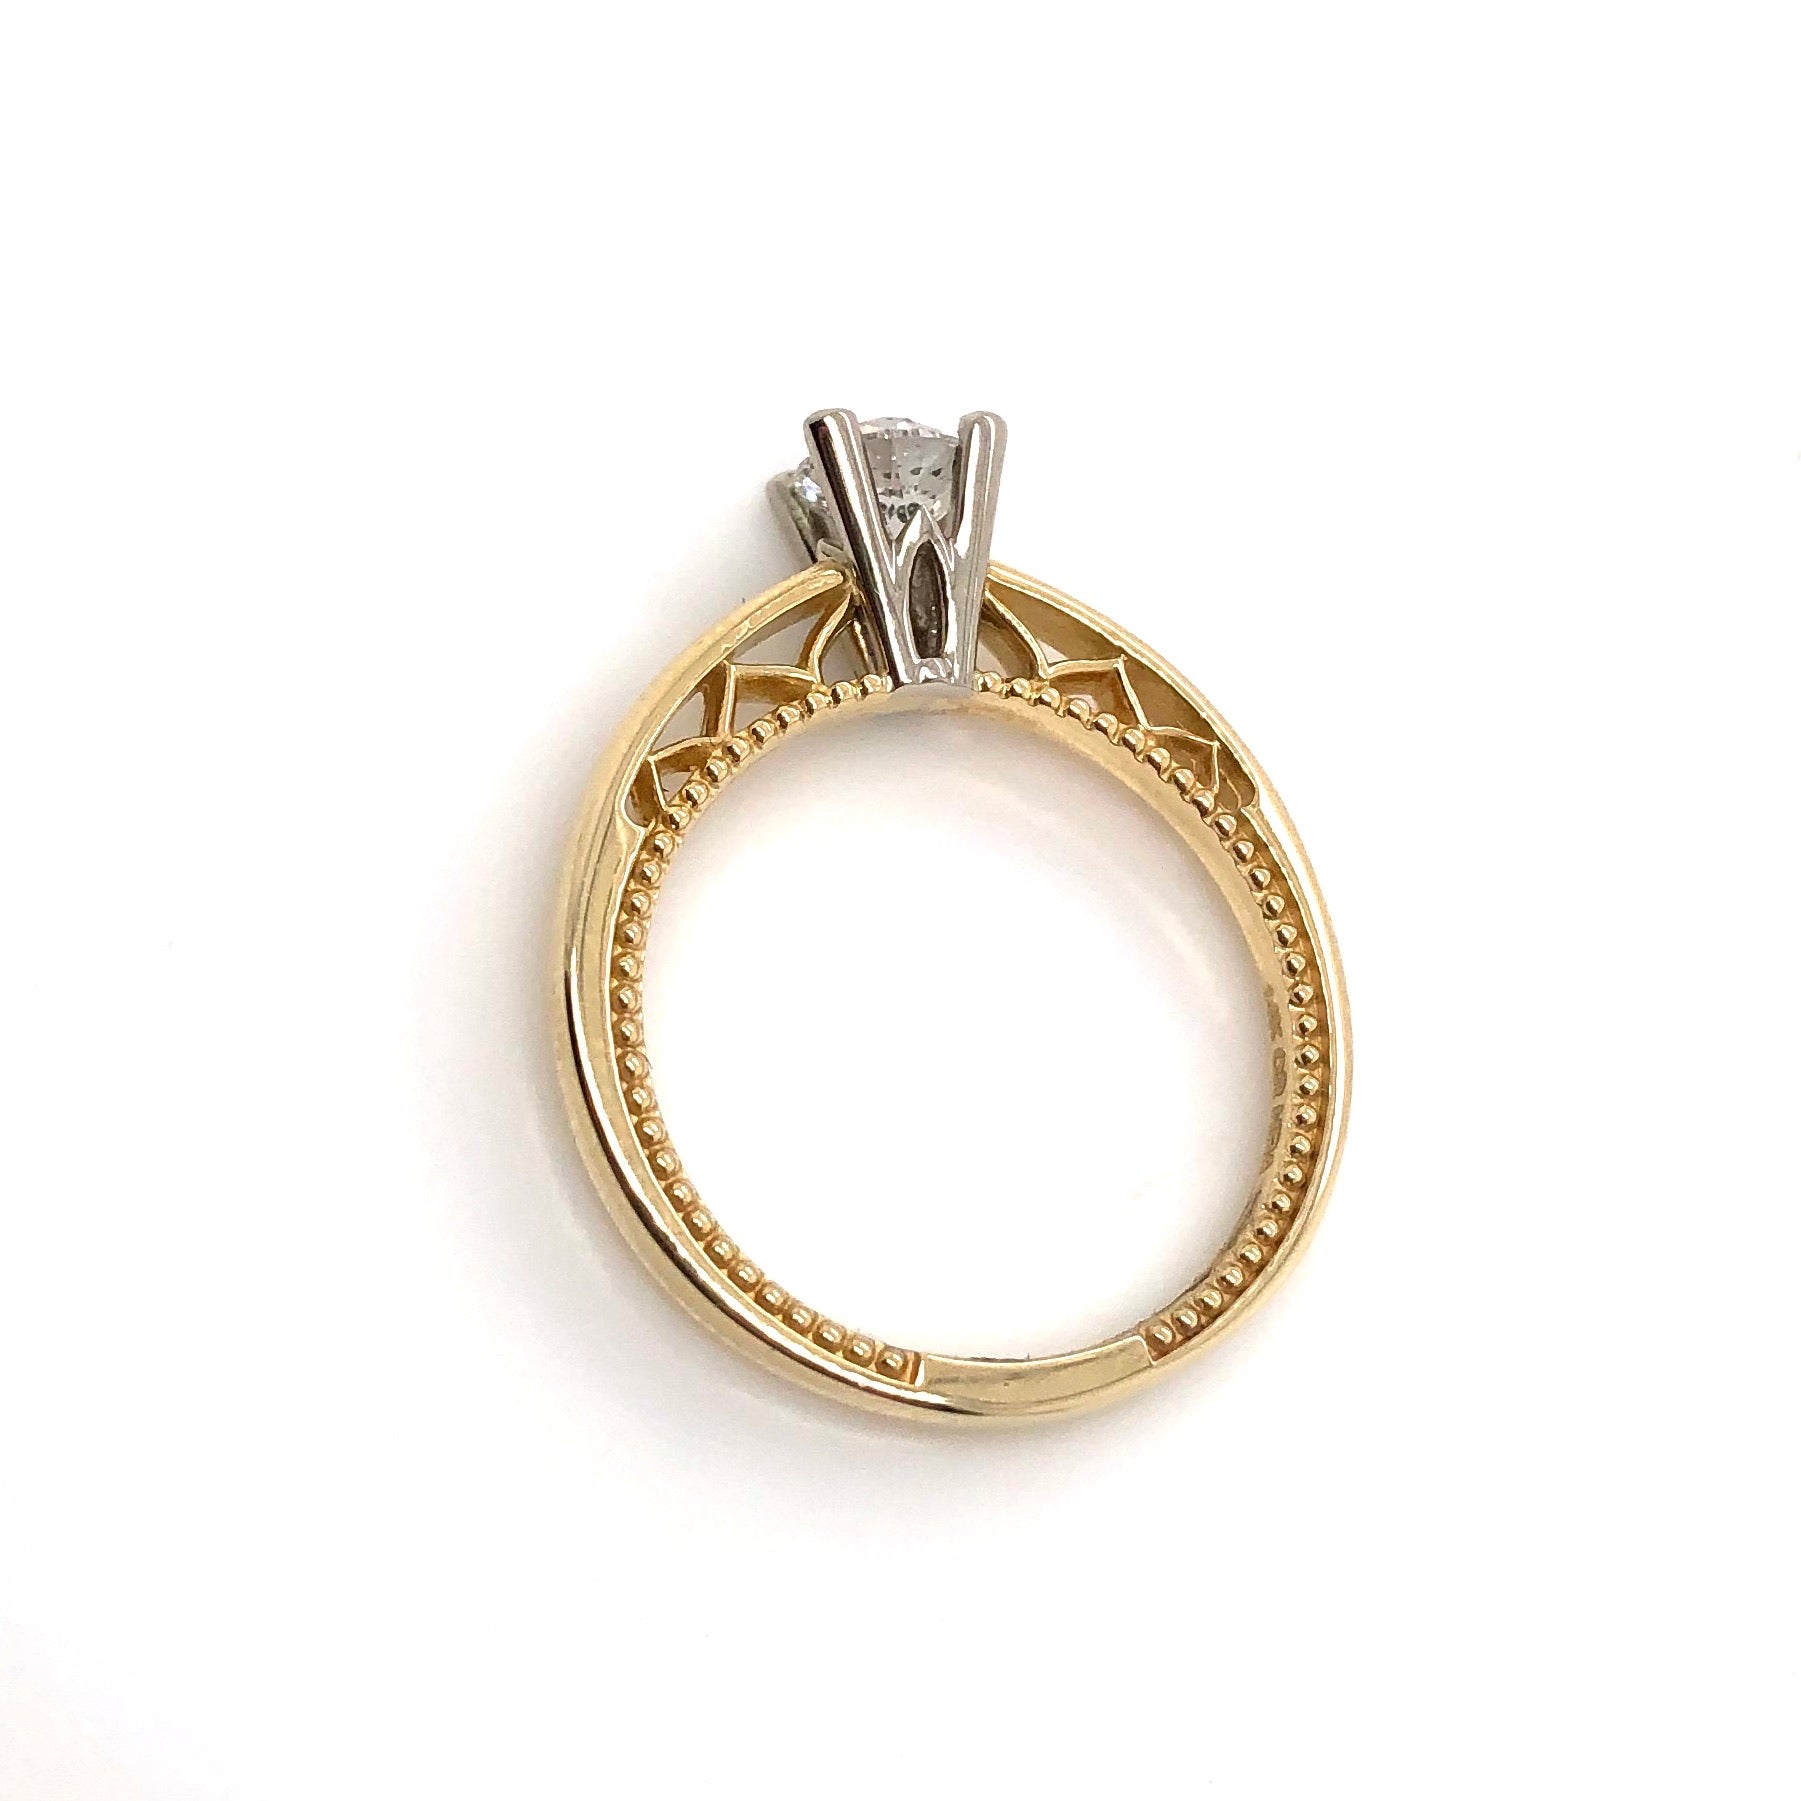 14K Yellow Gold Solitaire Diamond Engagement Ring With Filigree Detailing